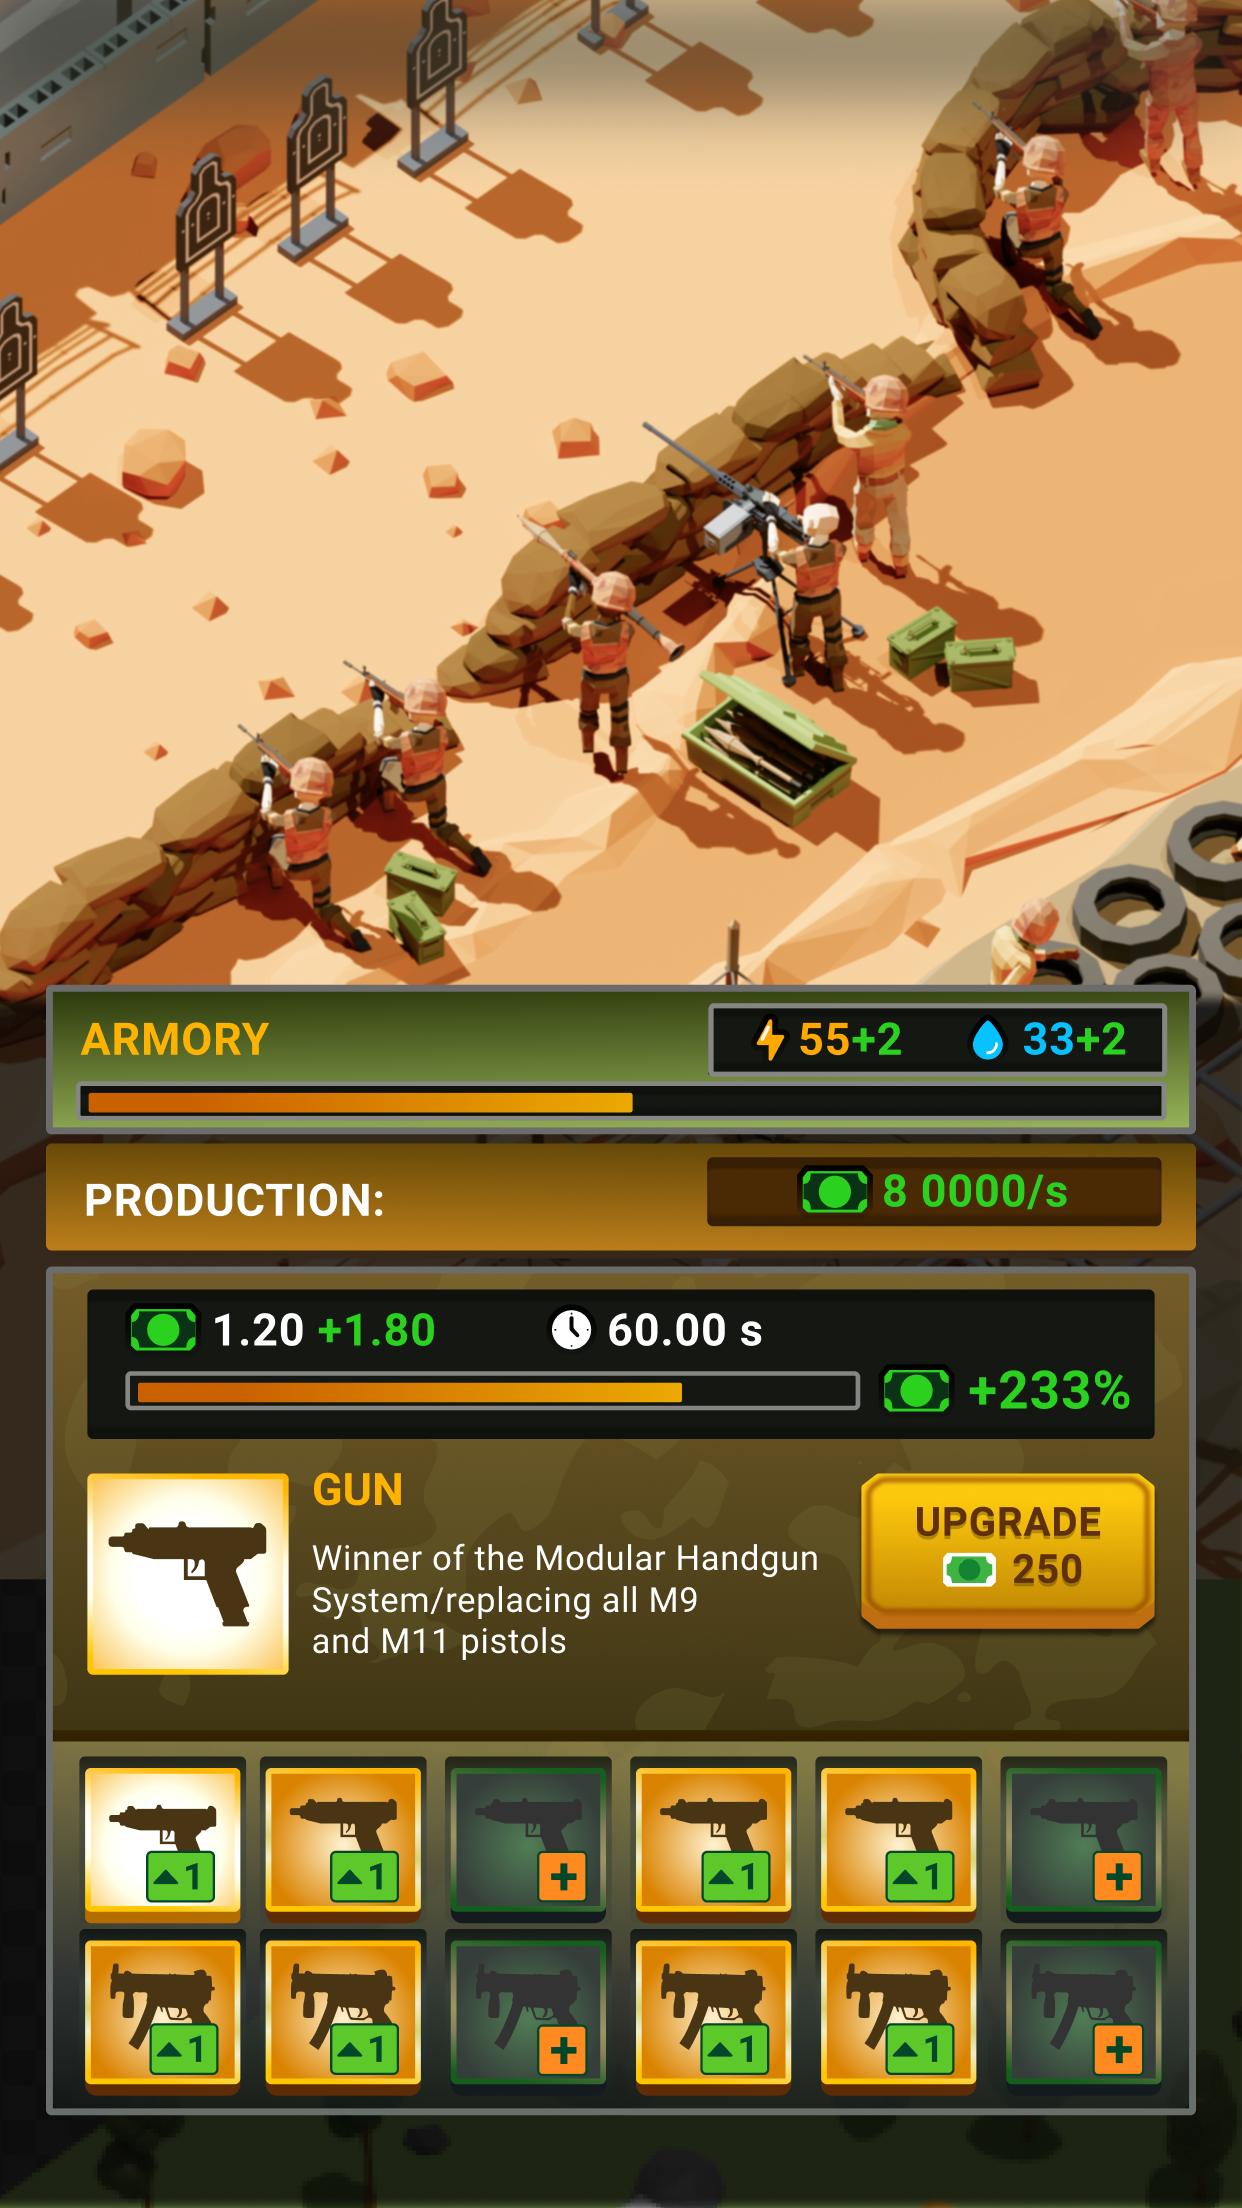 The army idle strategy game